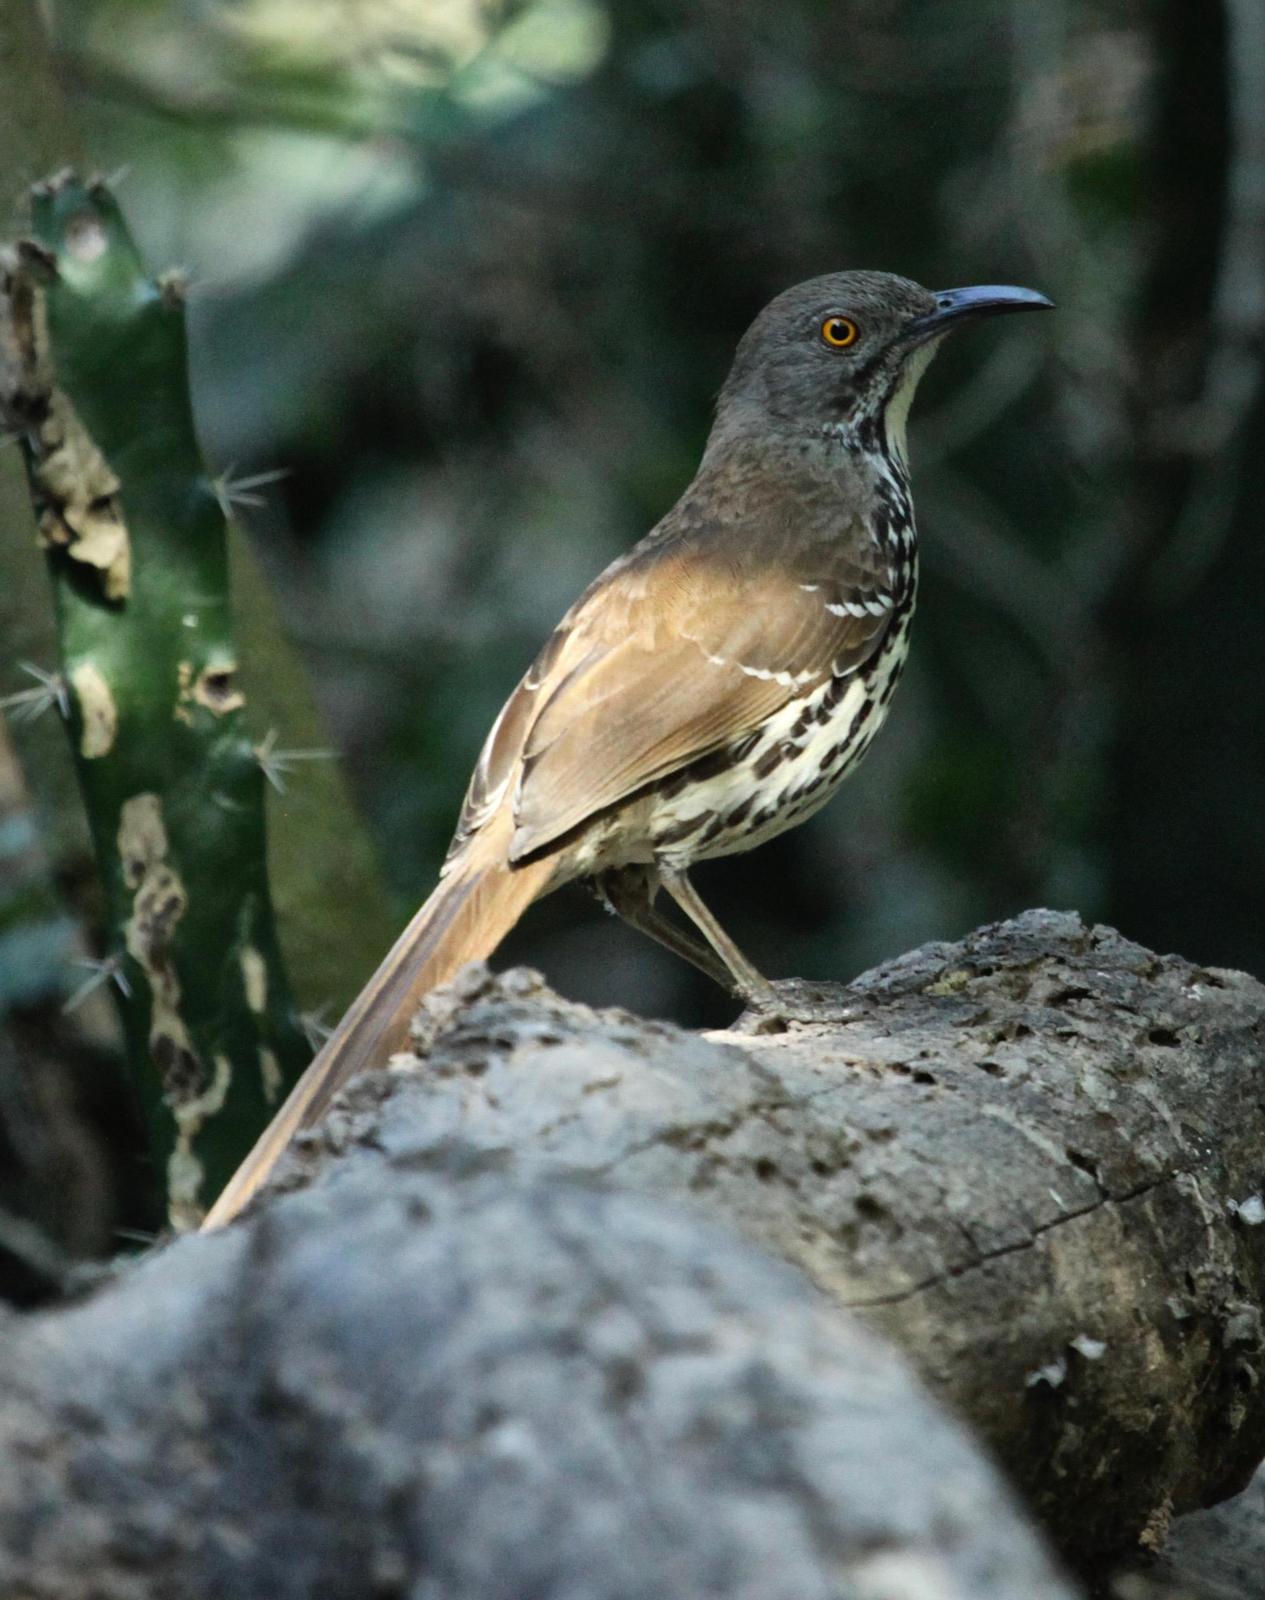 Long-billed Thrasher Photo by Rob O'Donnell